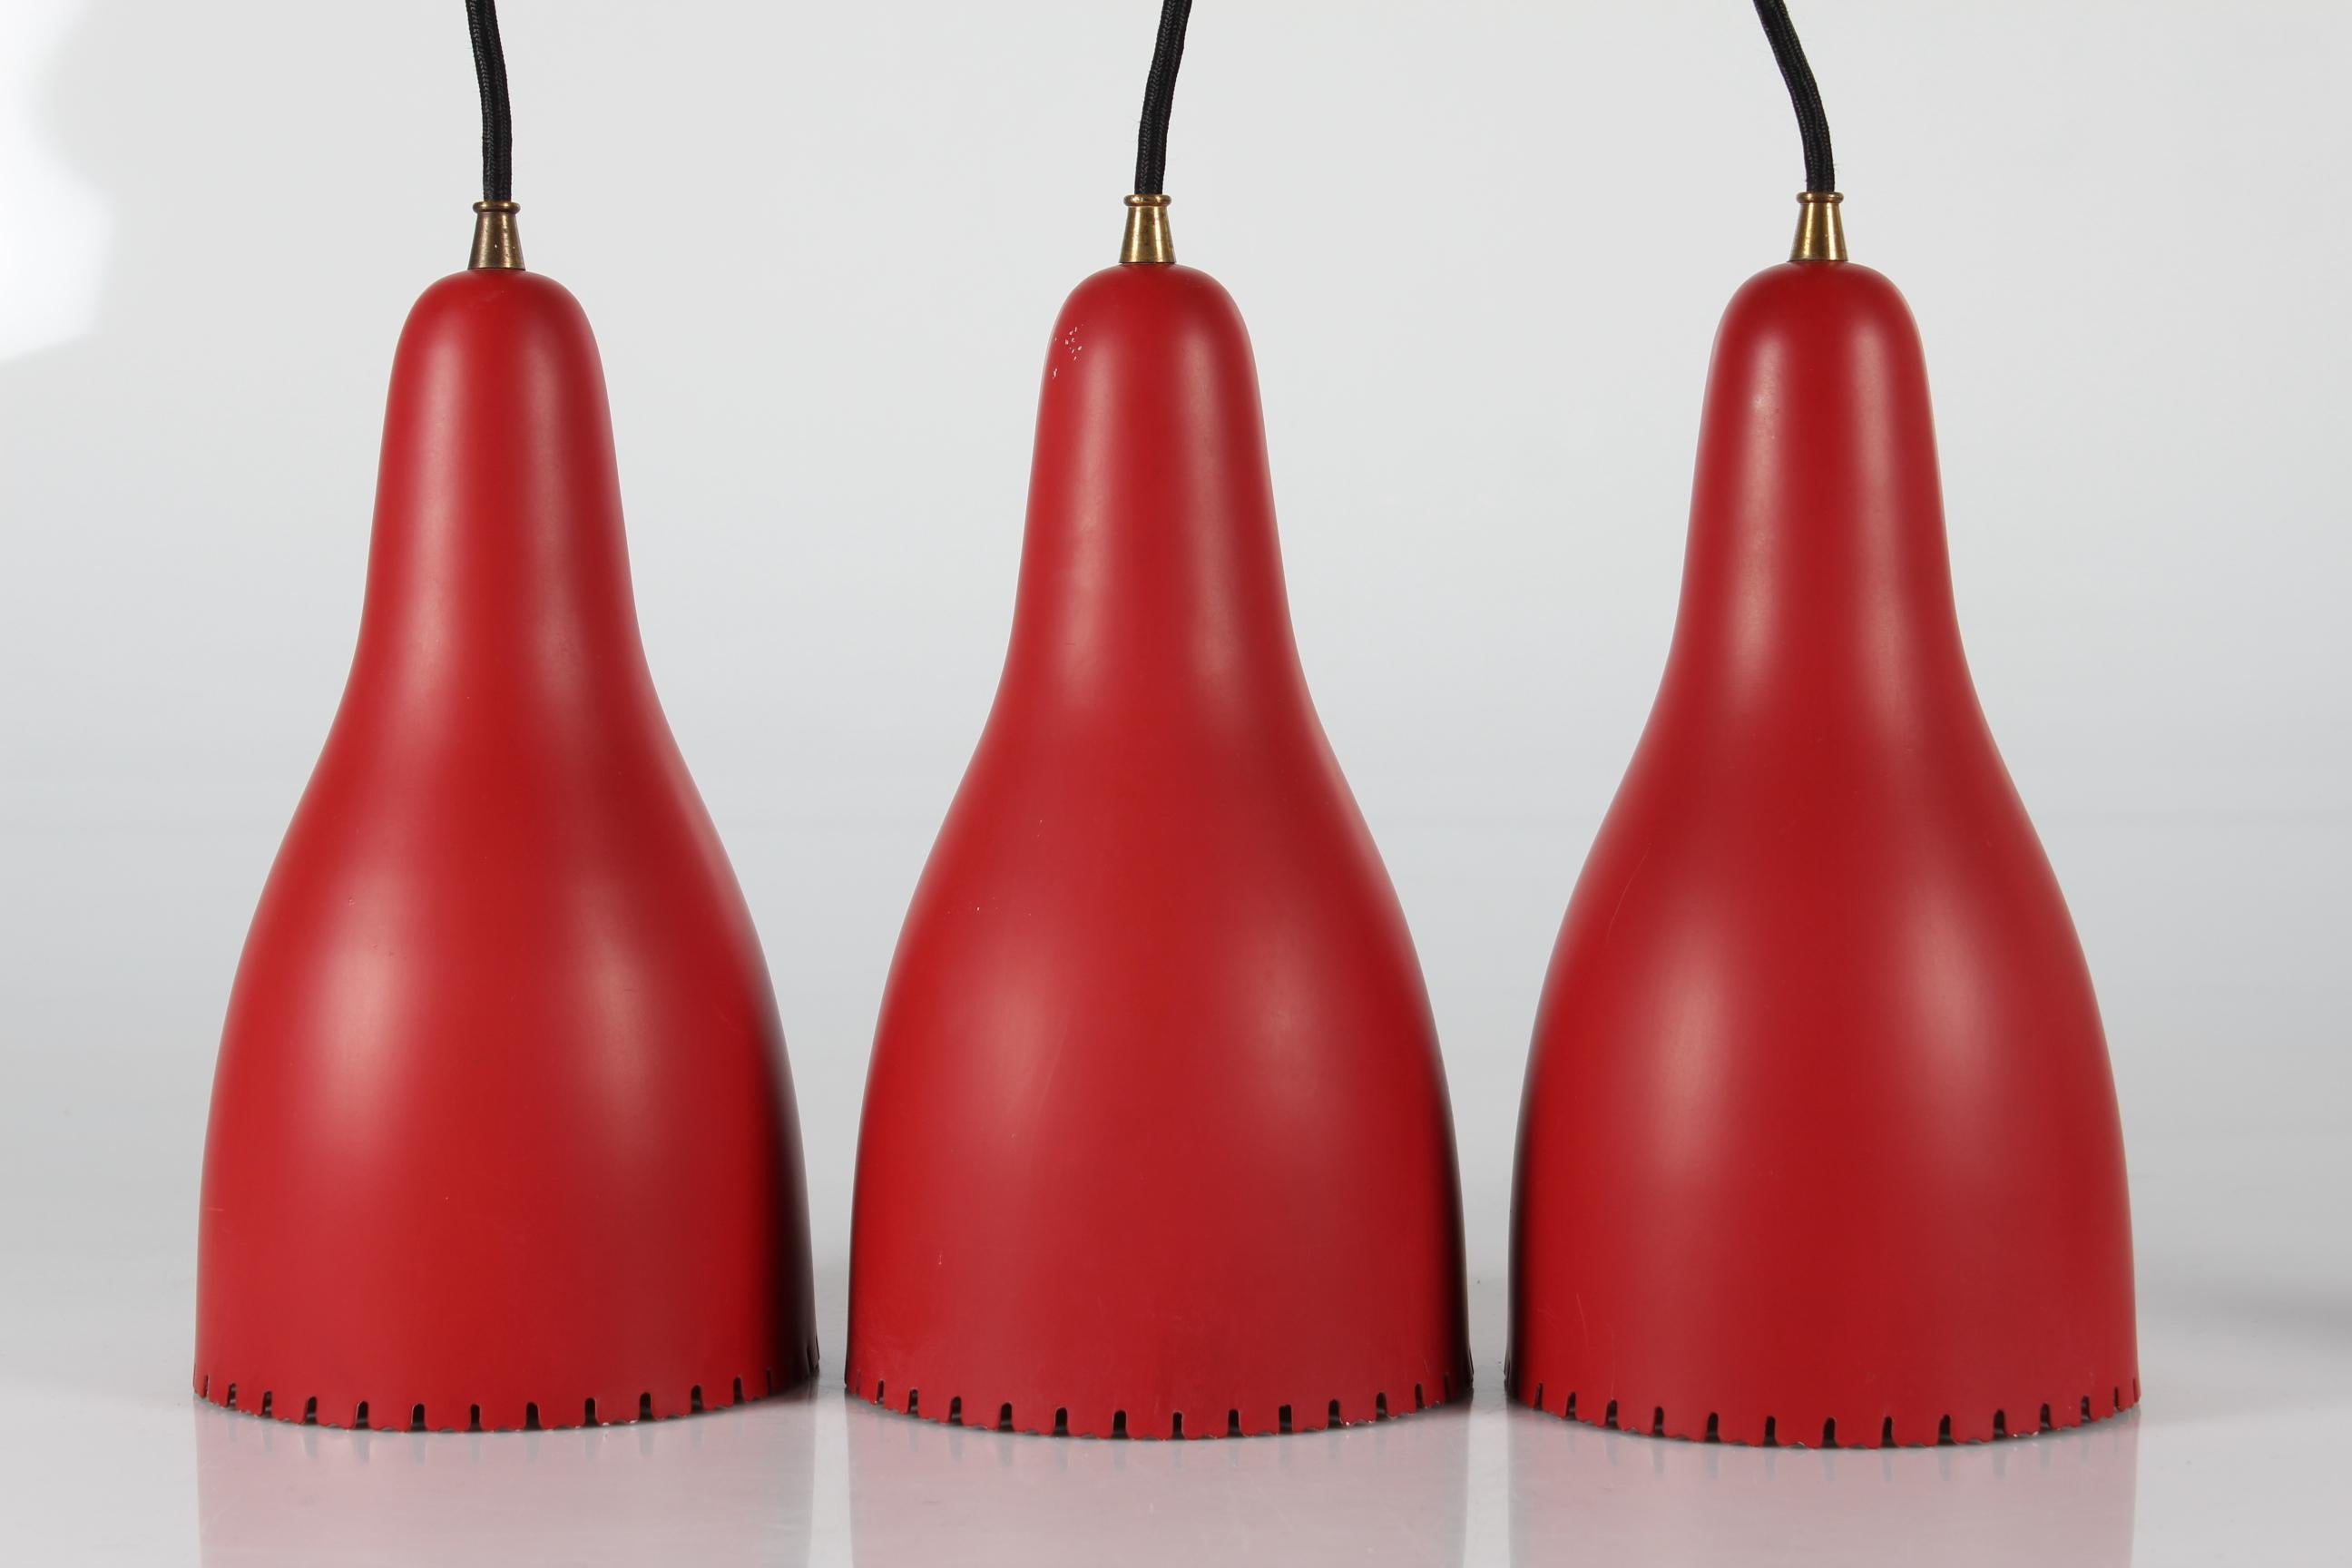 Bent Karlby 3-Cone Chandelier with Red Lacquer Made by Lyfa in Denmarkk, 1950s For Sale 1